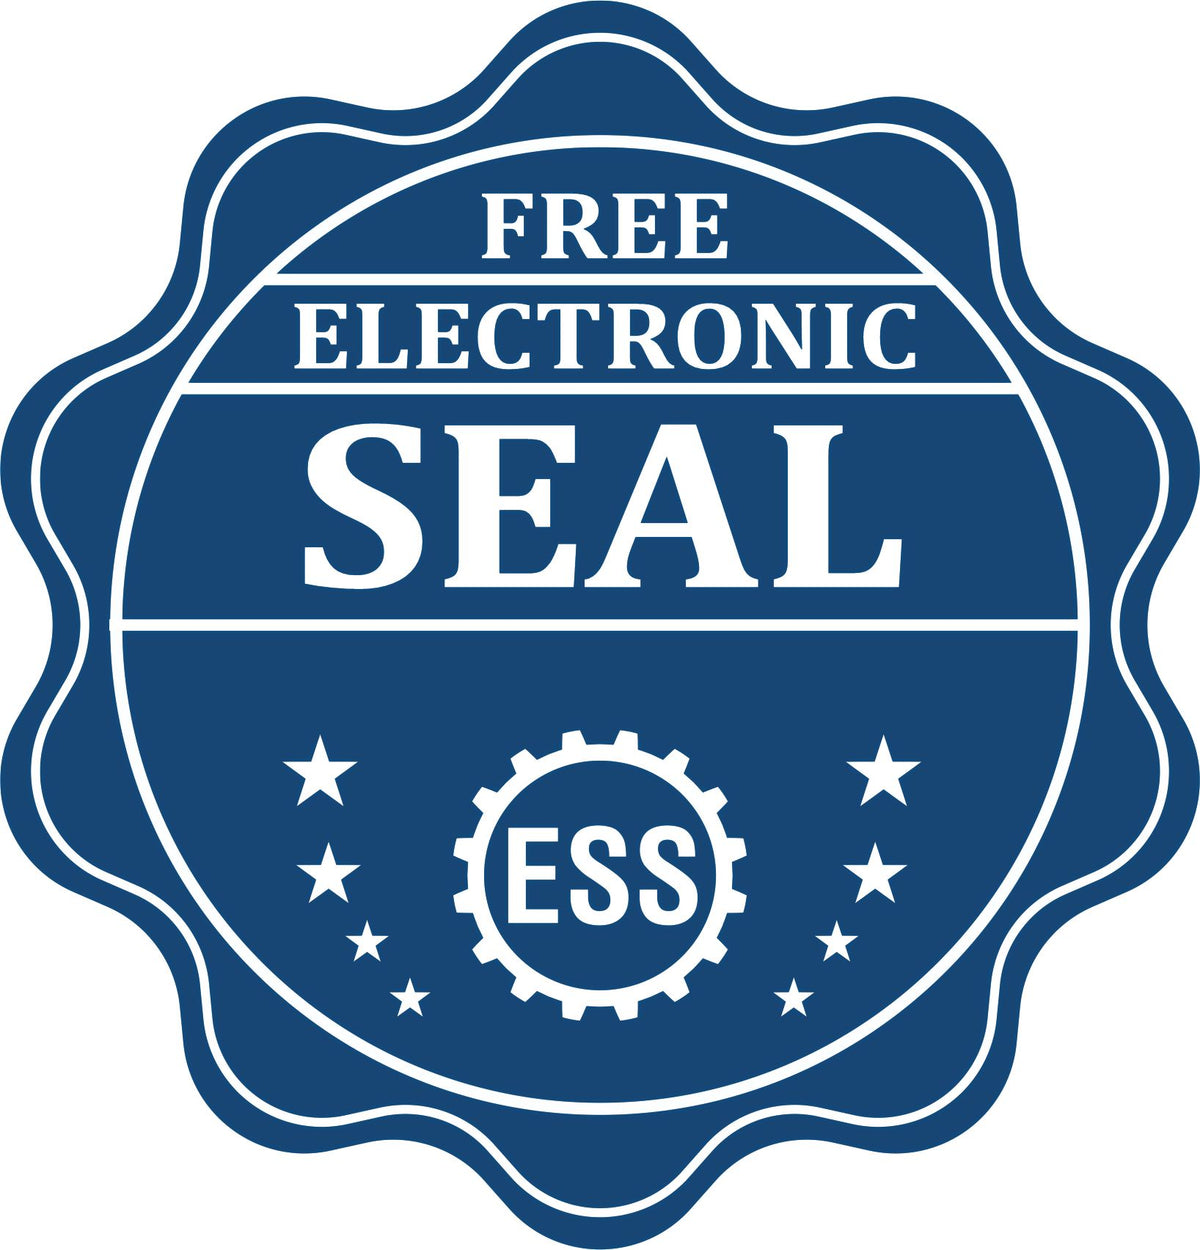 A badge showing a free electronic seal for the Slim Pre-Inked Massachusetts Professional Engineer Seal Stamp with stars and the ESS gear on the emblem.